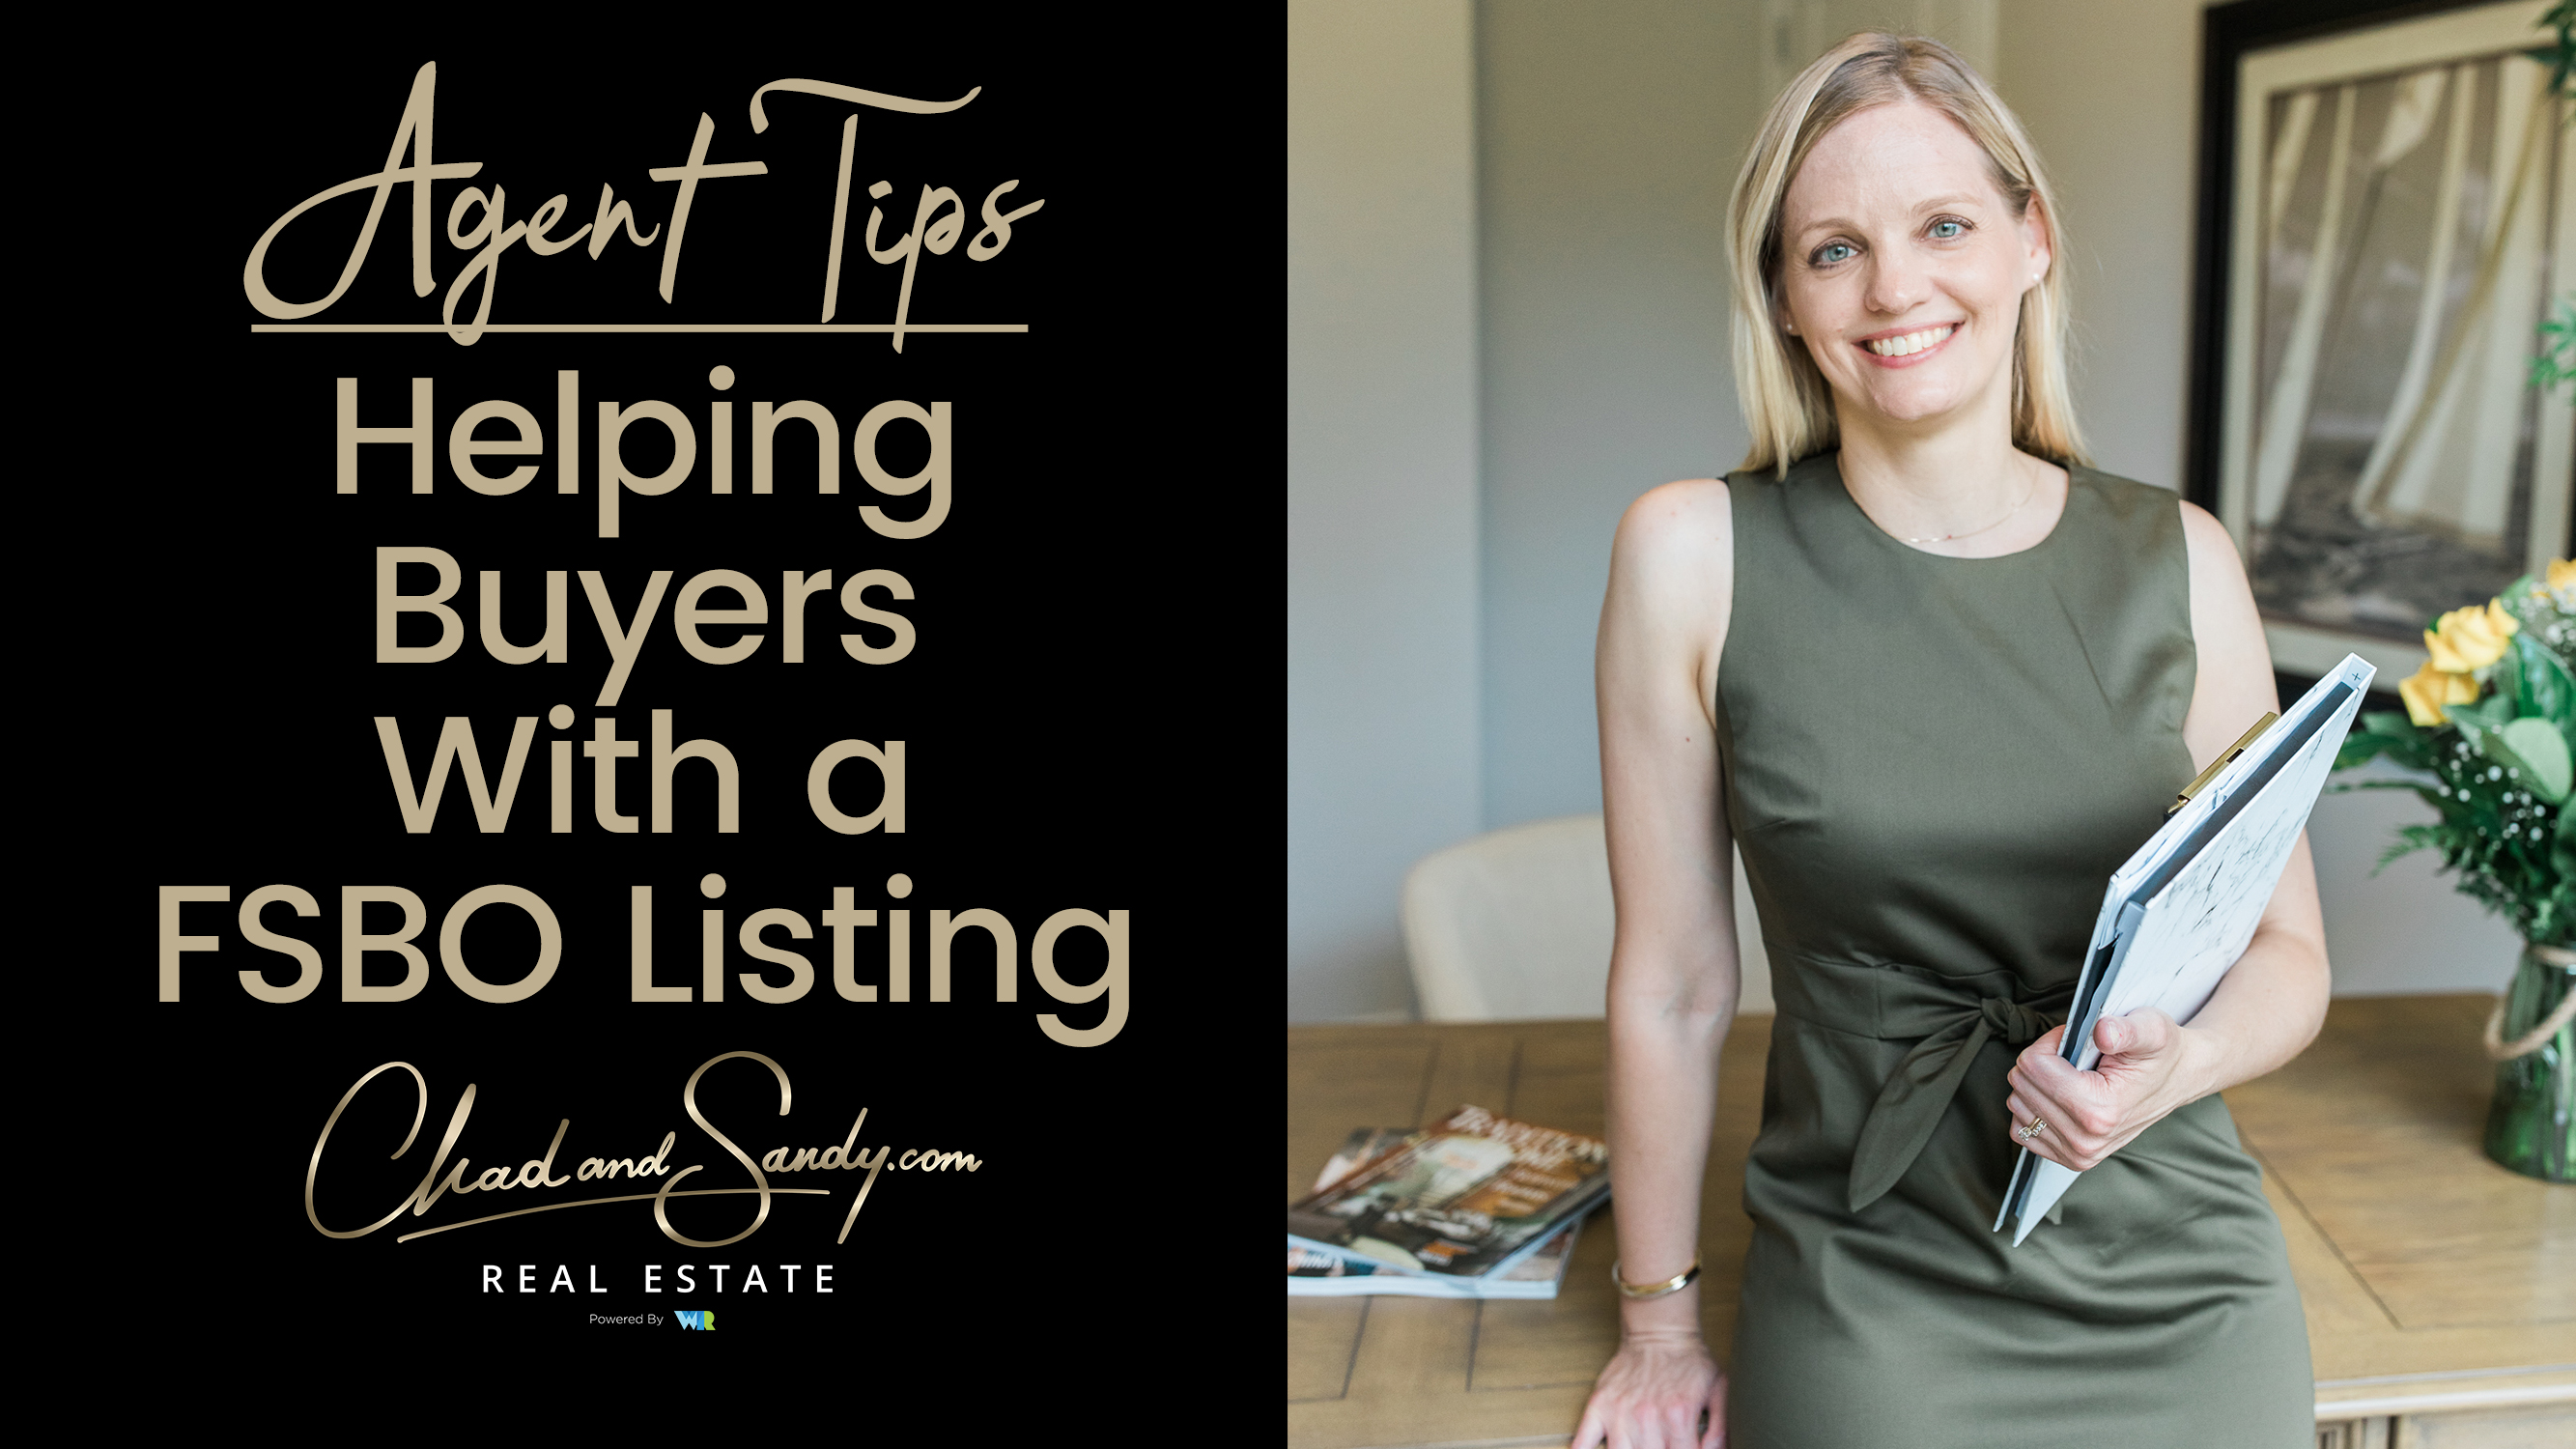 3 Tips for Helping Buyers With FSBO Listings